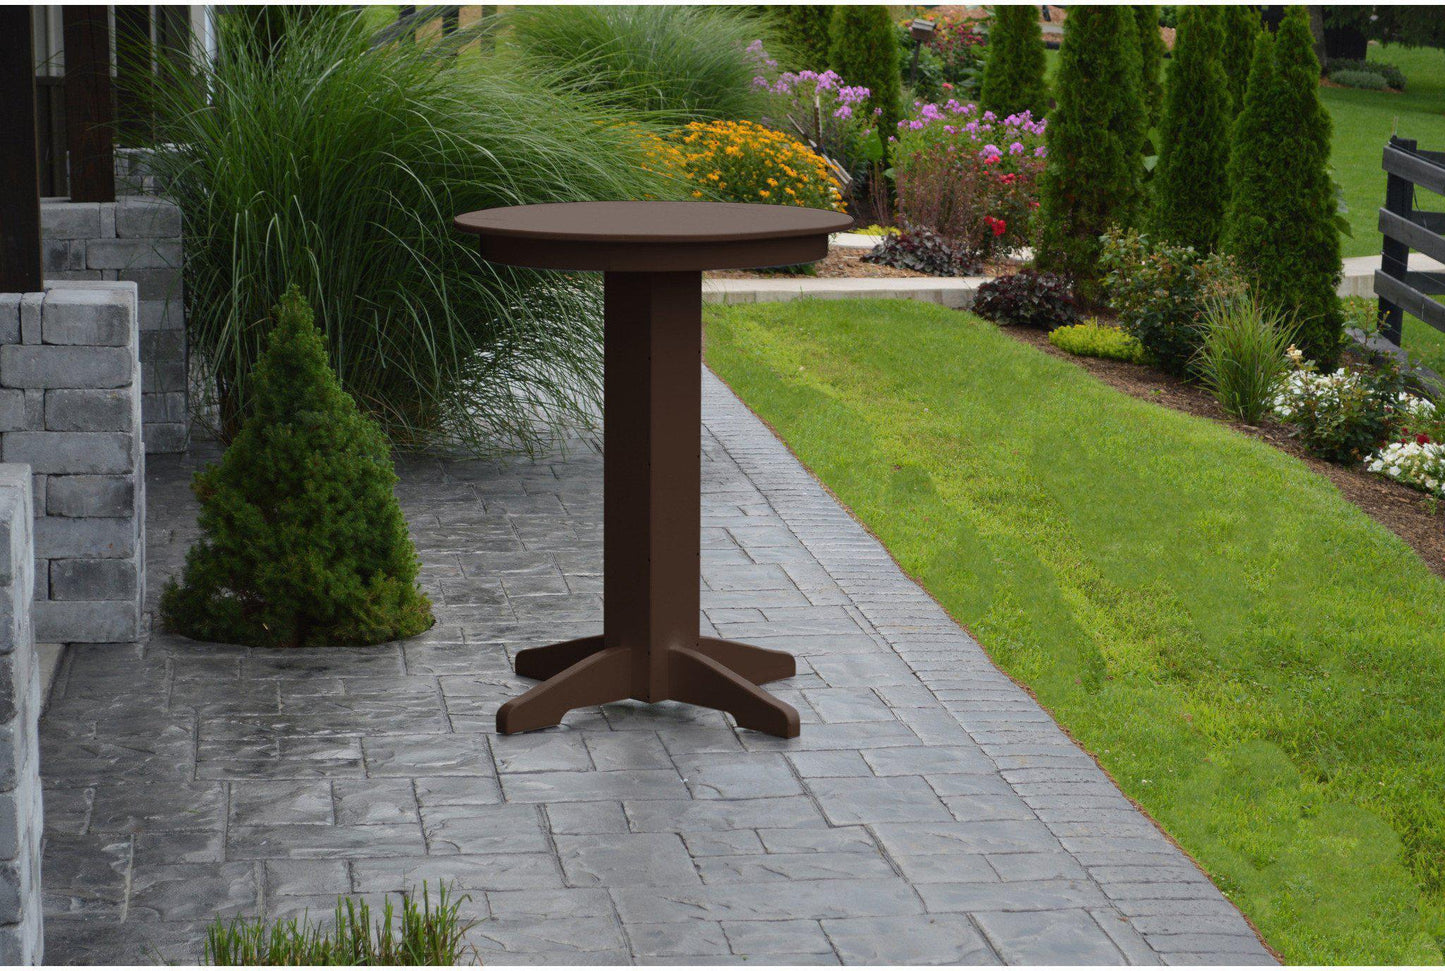 A&L Furniture Recycled Plastic 33" Round Bar Table - Tudor Brown